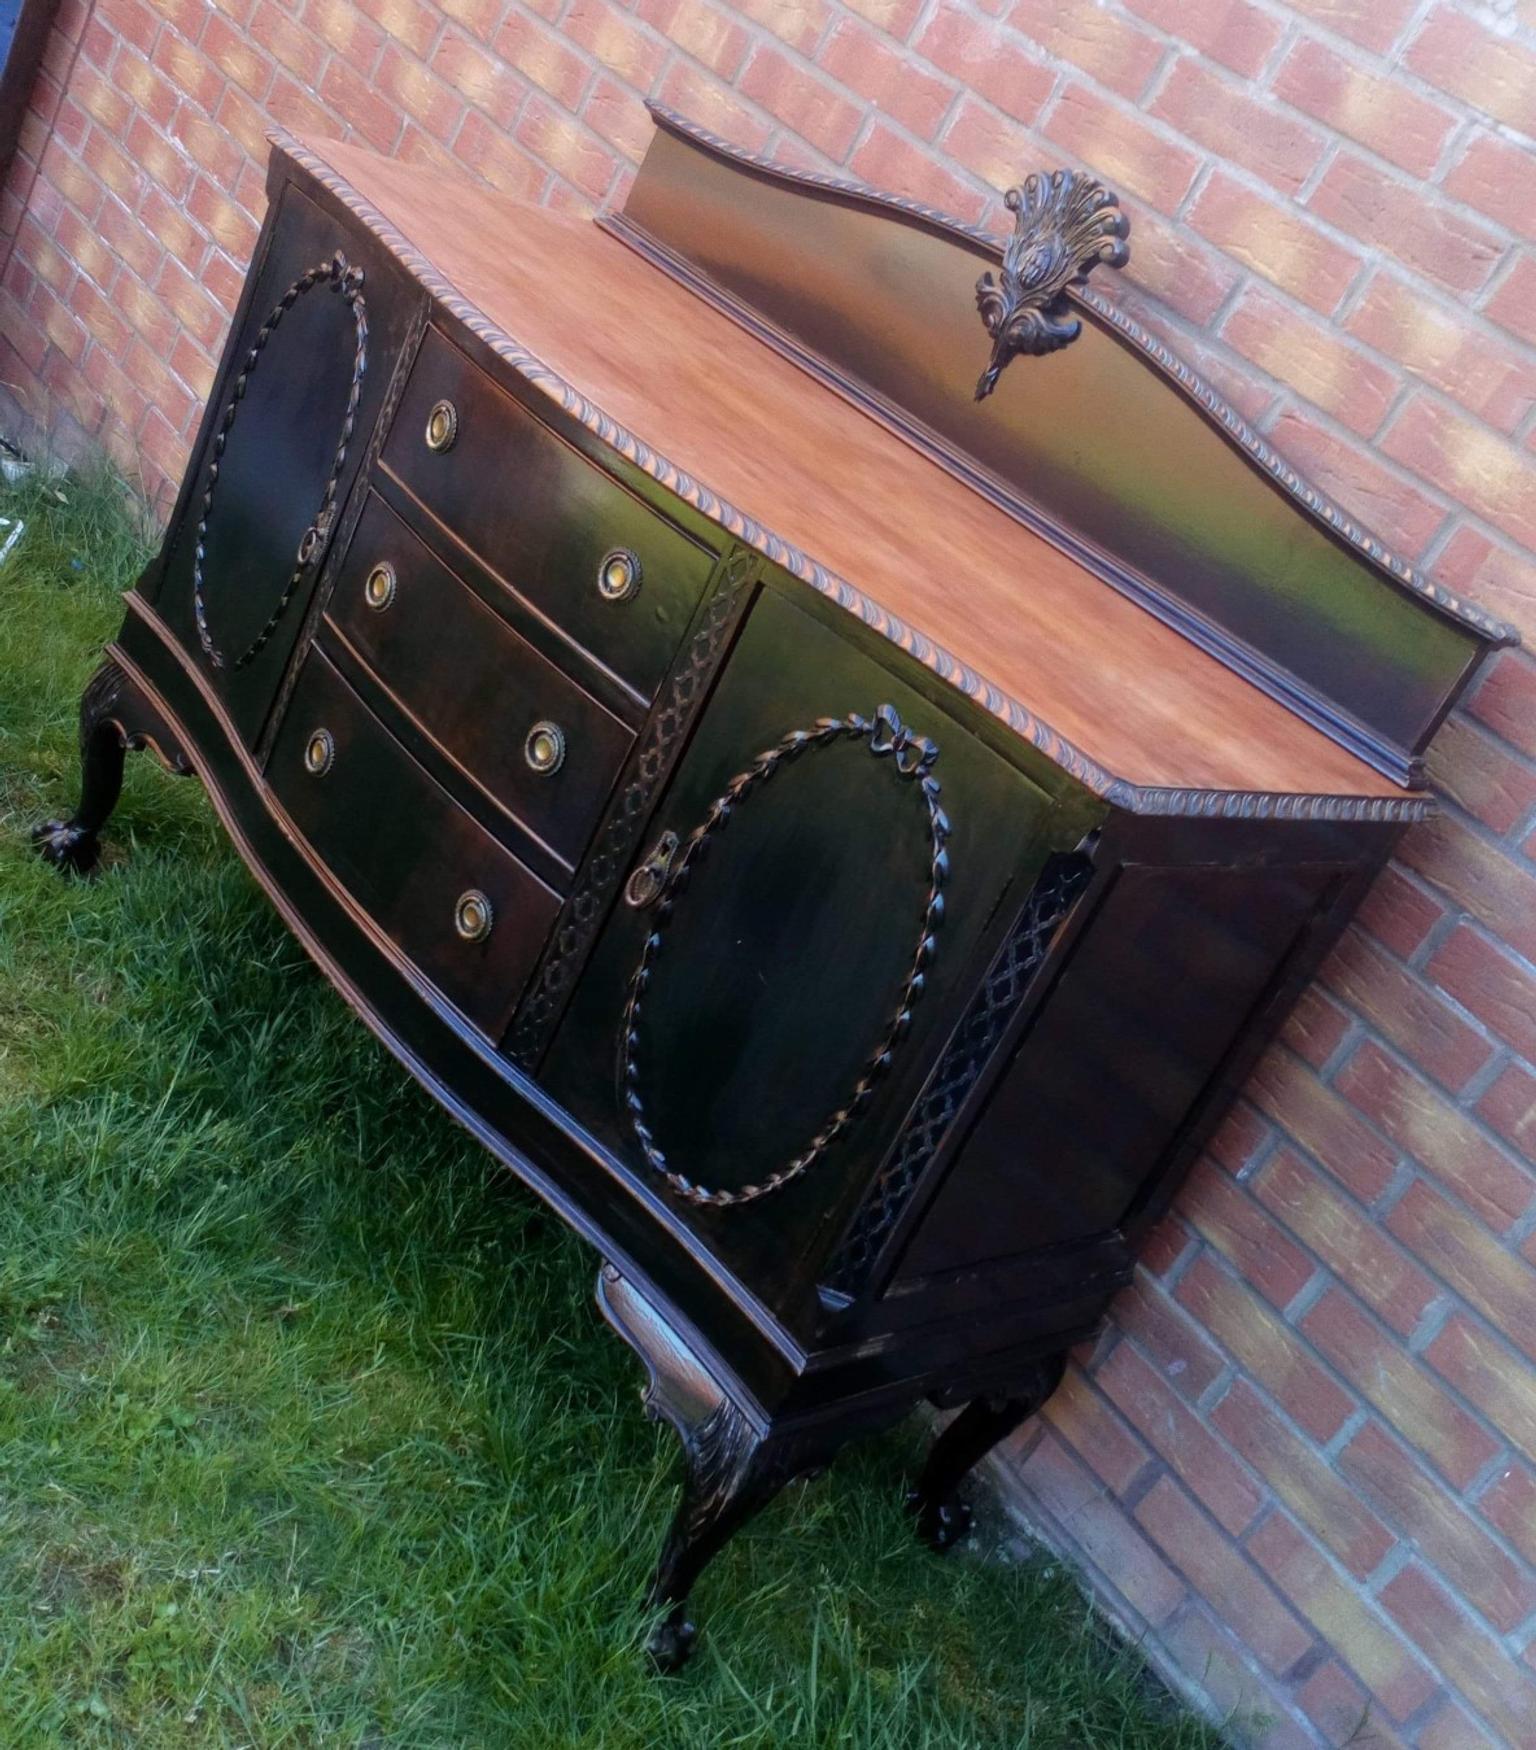 Dresser Sideboard Shabby Chic Style In Ws8 Walsall Fur 120 00